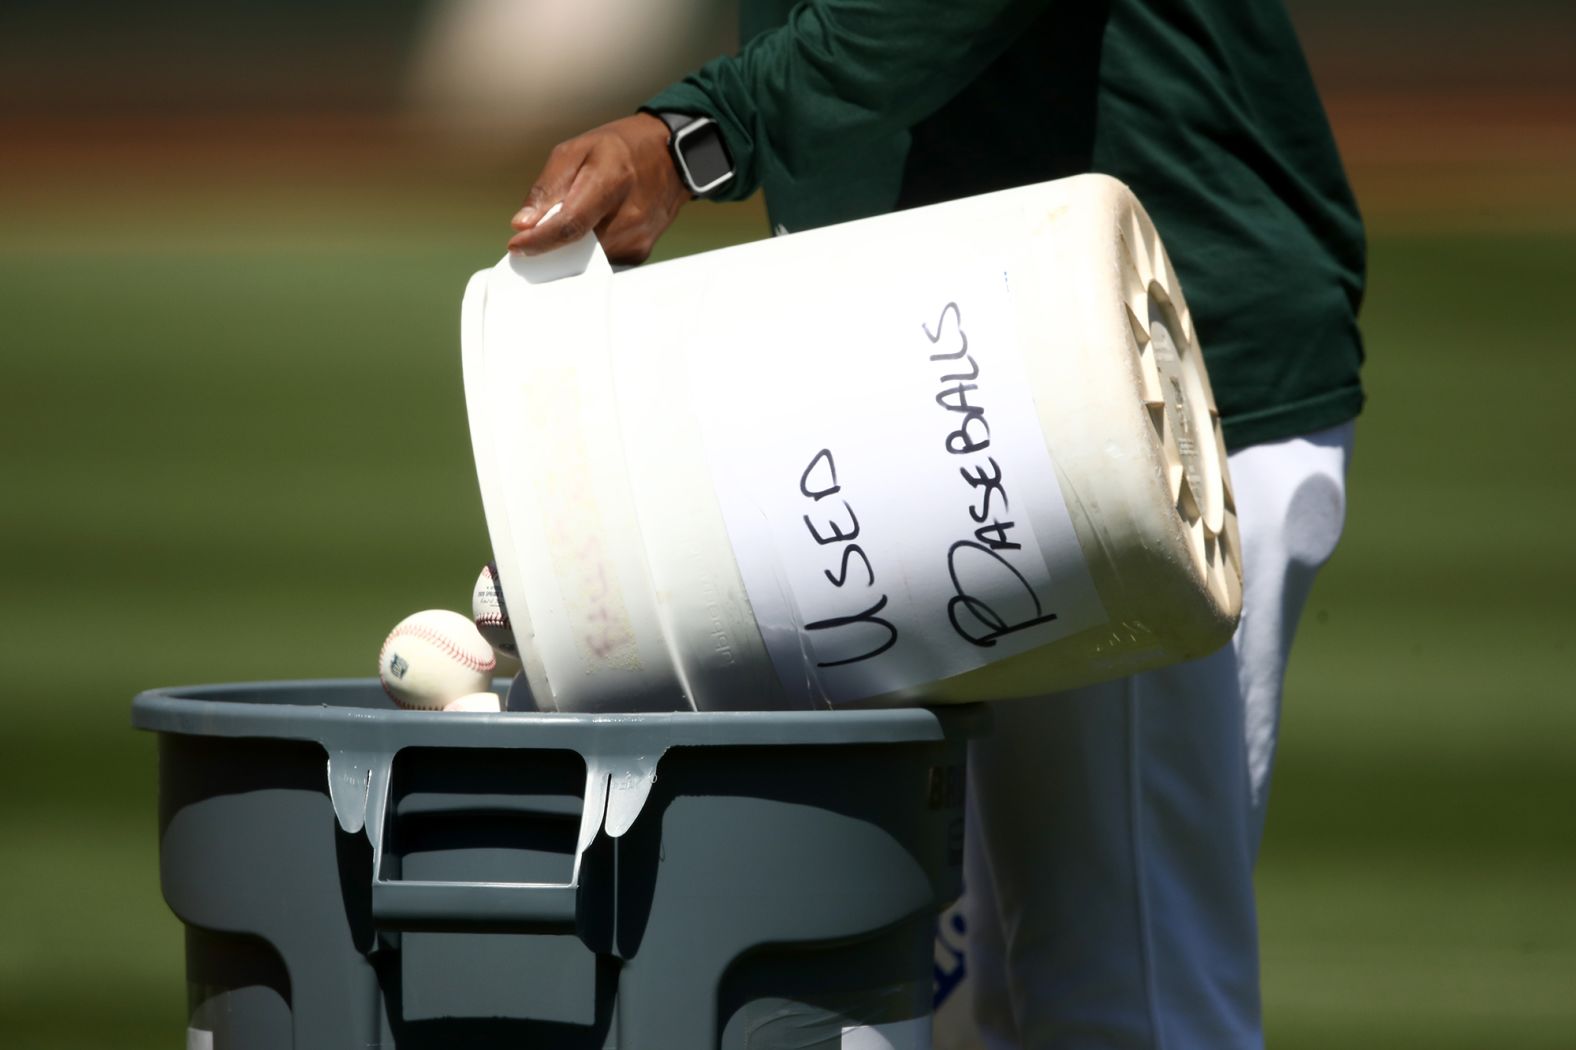 A coach dumps a bucket of used baseballs during workouts in Oakland on July 5. During the season, balls will be taken out of play after they've been handled by multiple players. Then the balls will be sanitized and recycled days later.